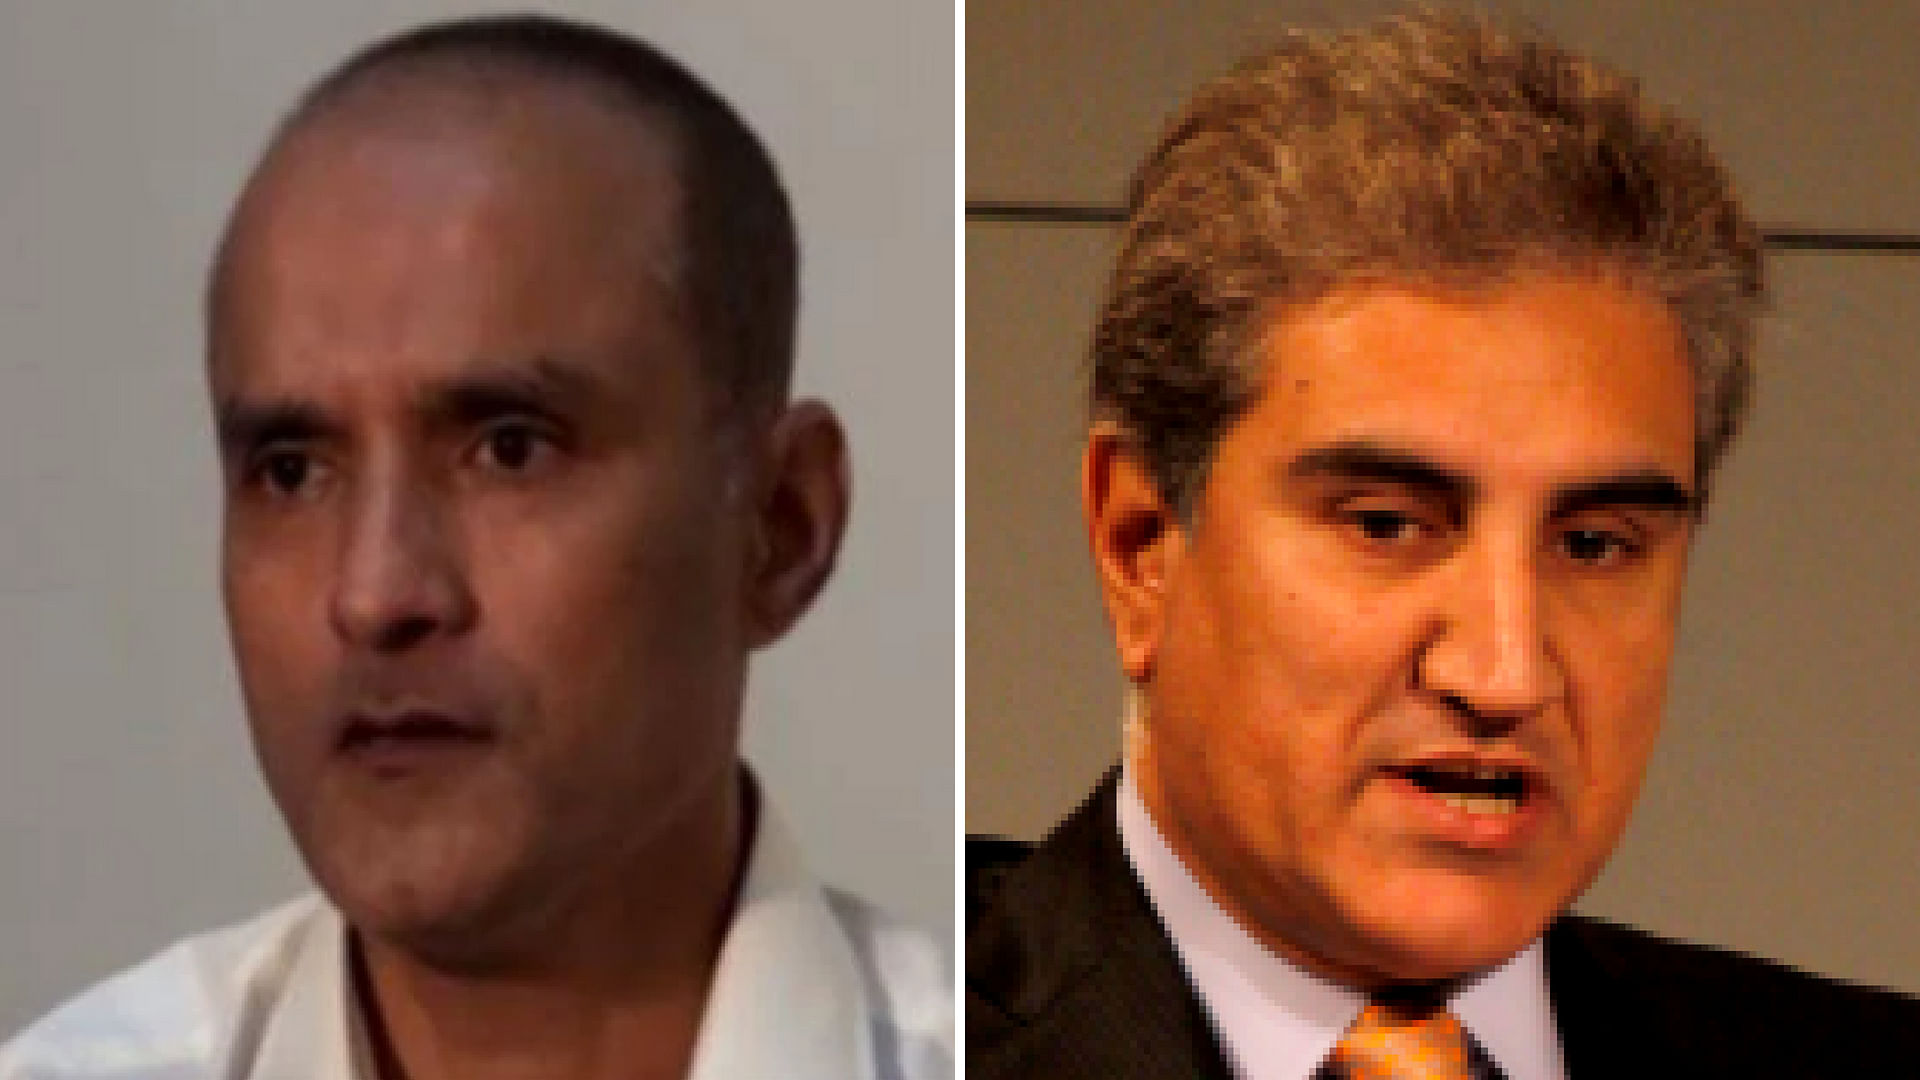 Pakistan has “solid evidence” against Indian national Kulbhushan Jadhav (left), the country’s new Foreign Minister Shah Mehmood Qureshi (right) said on Thursday, 23 August.